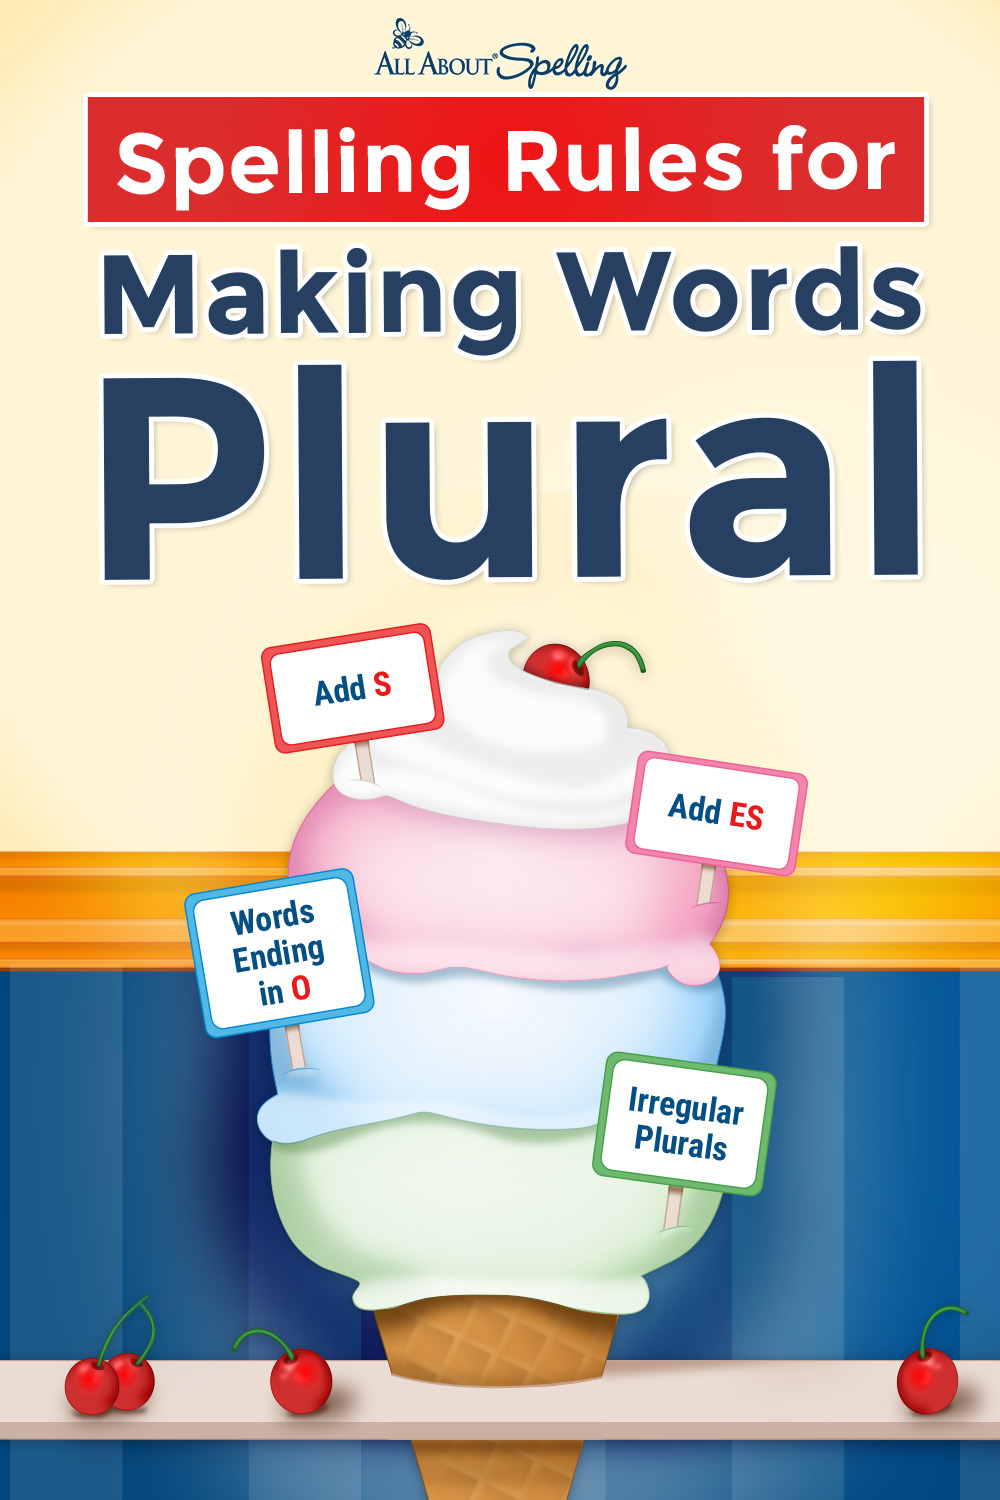 rope discord warrant Spelling Rules for Making Words Plural (Video + Poster!)